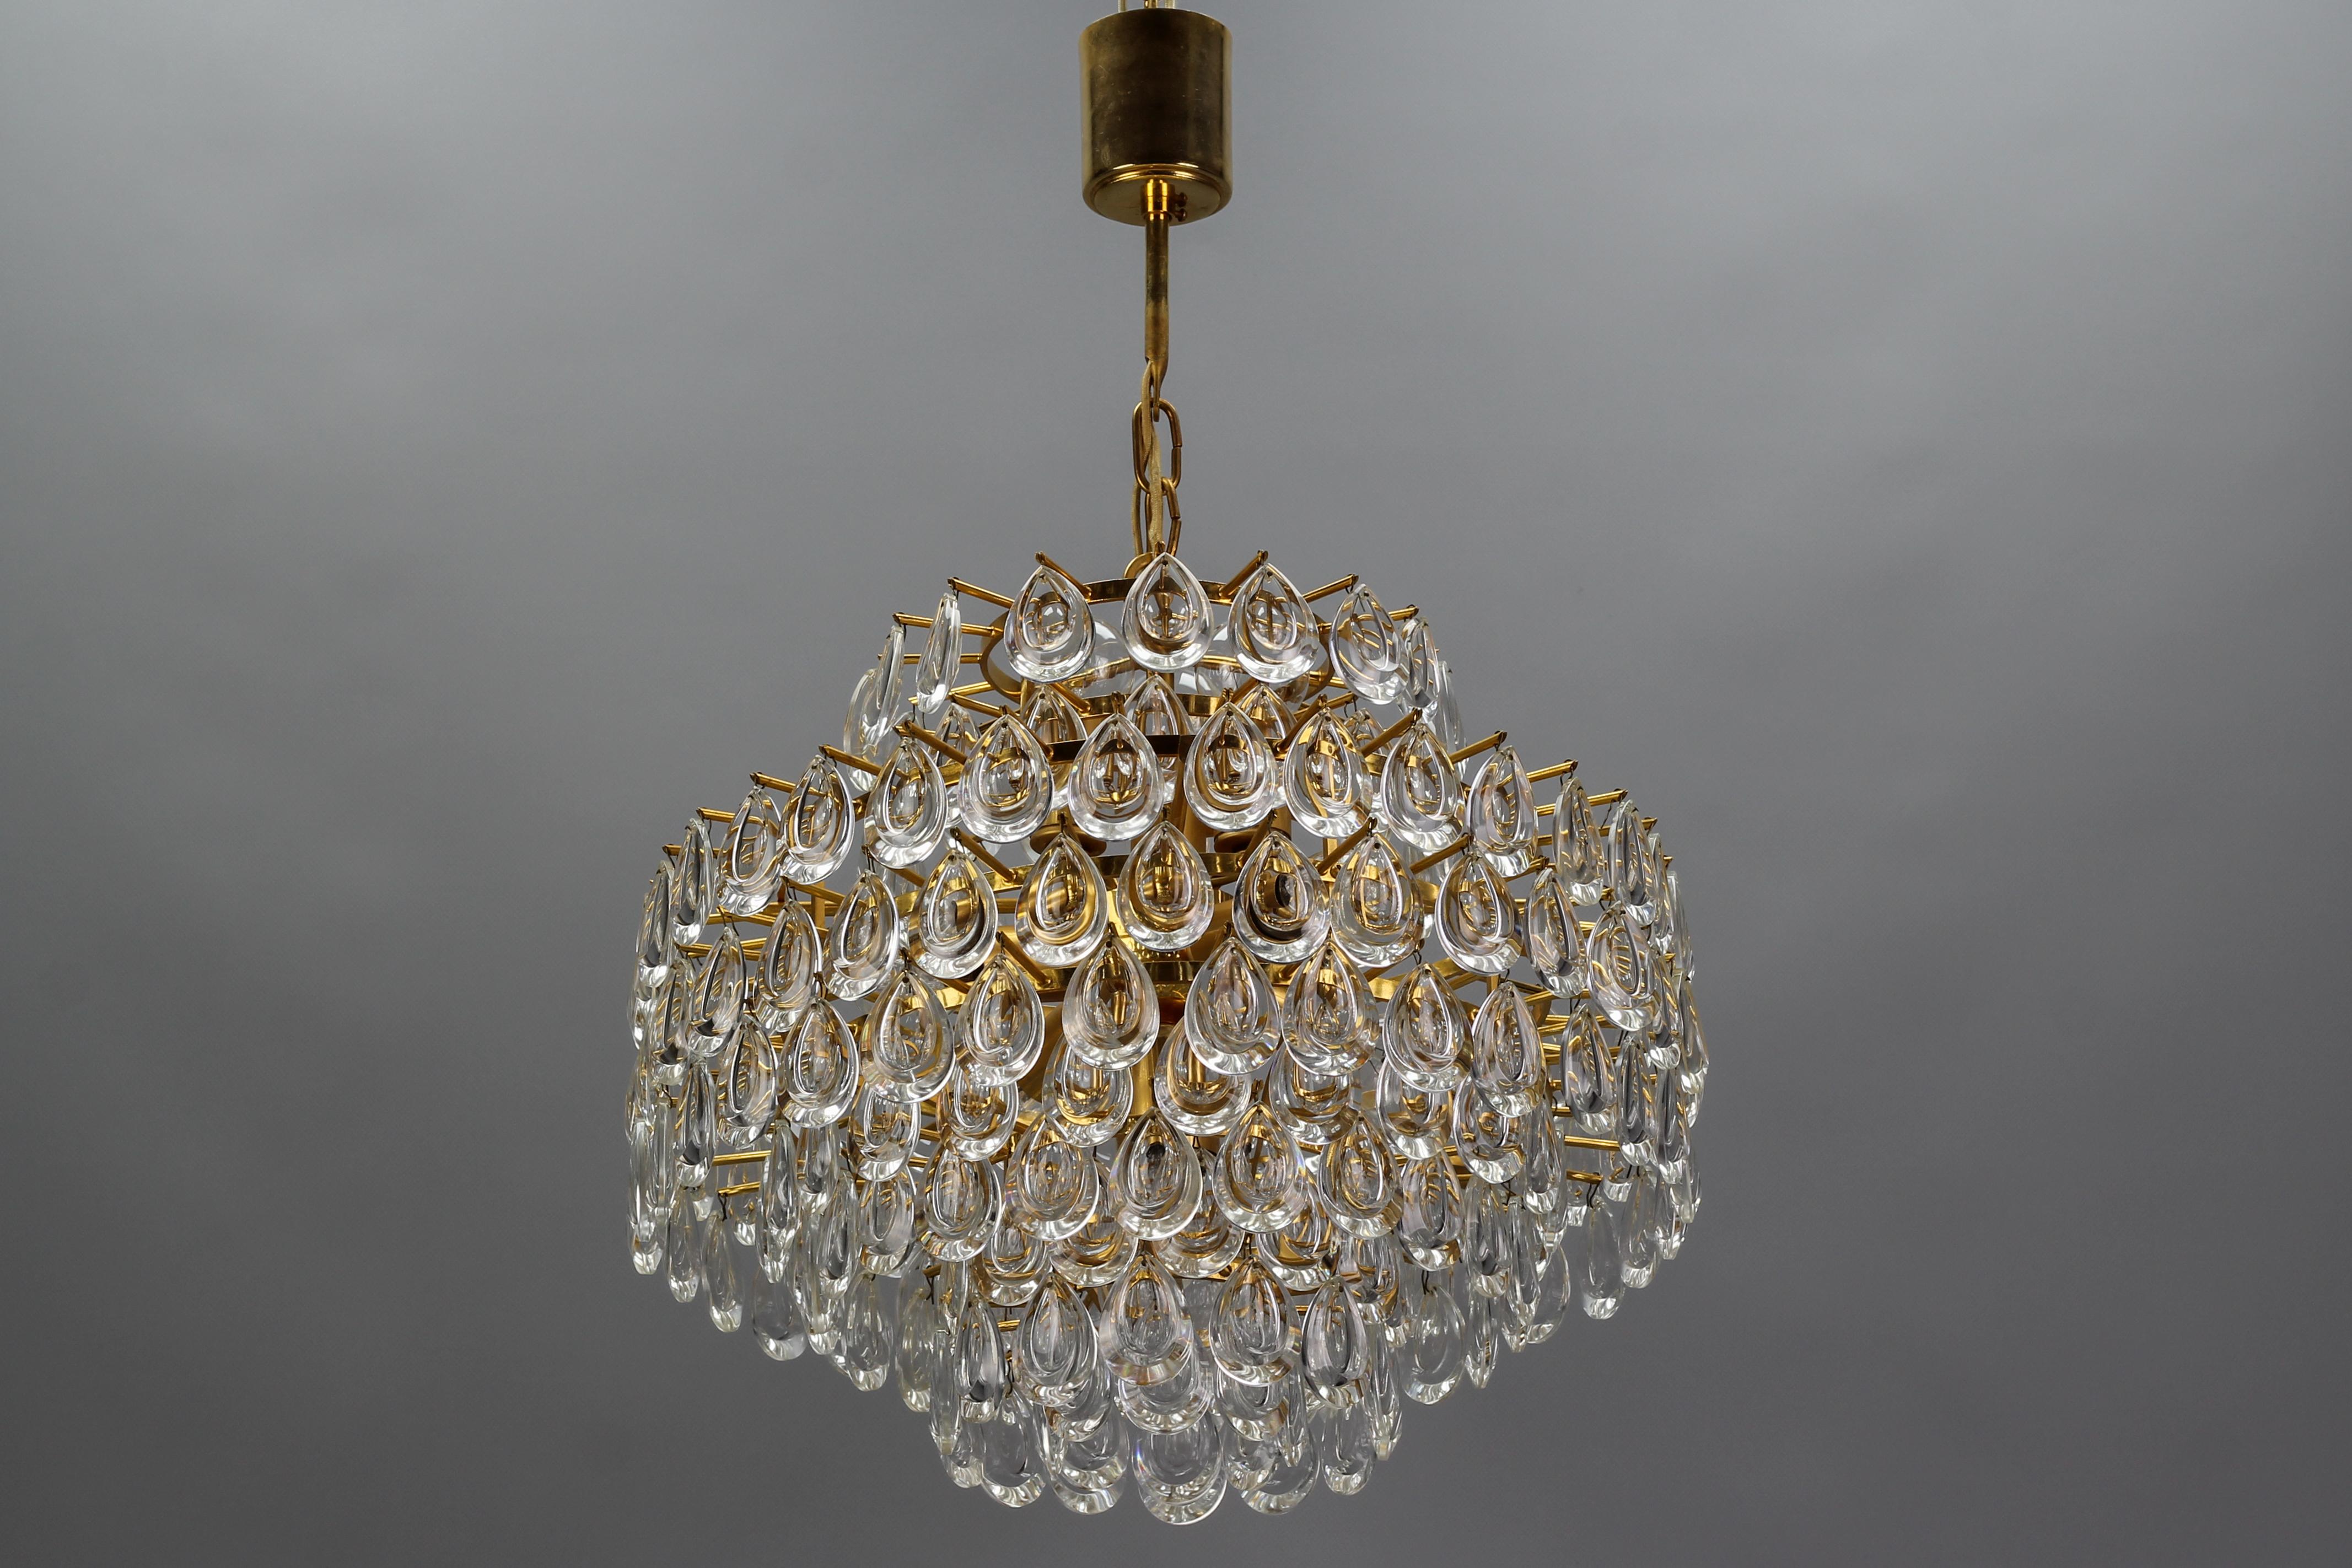 German Mid-Century Crystal Glass and Gilt Brass Seven-Light Chandelier by Palwa For Sale